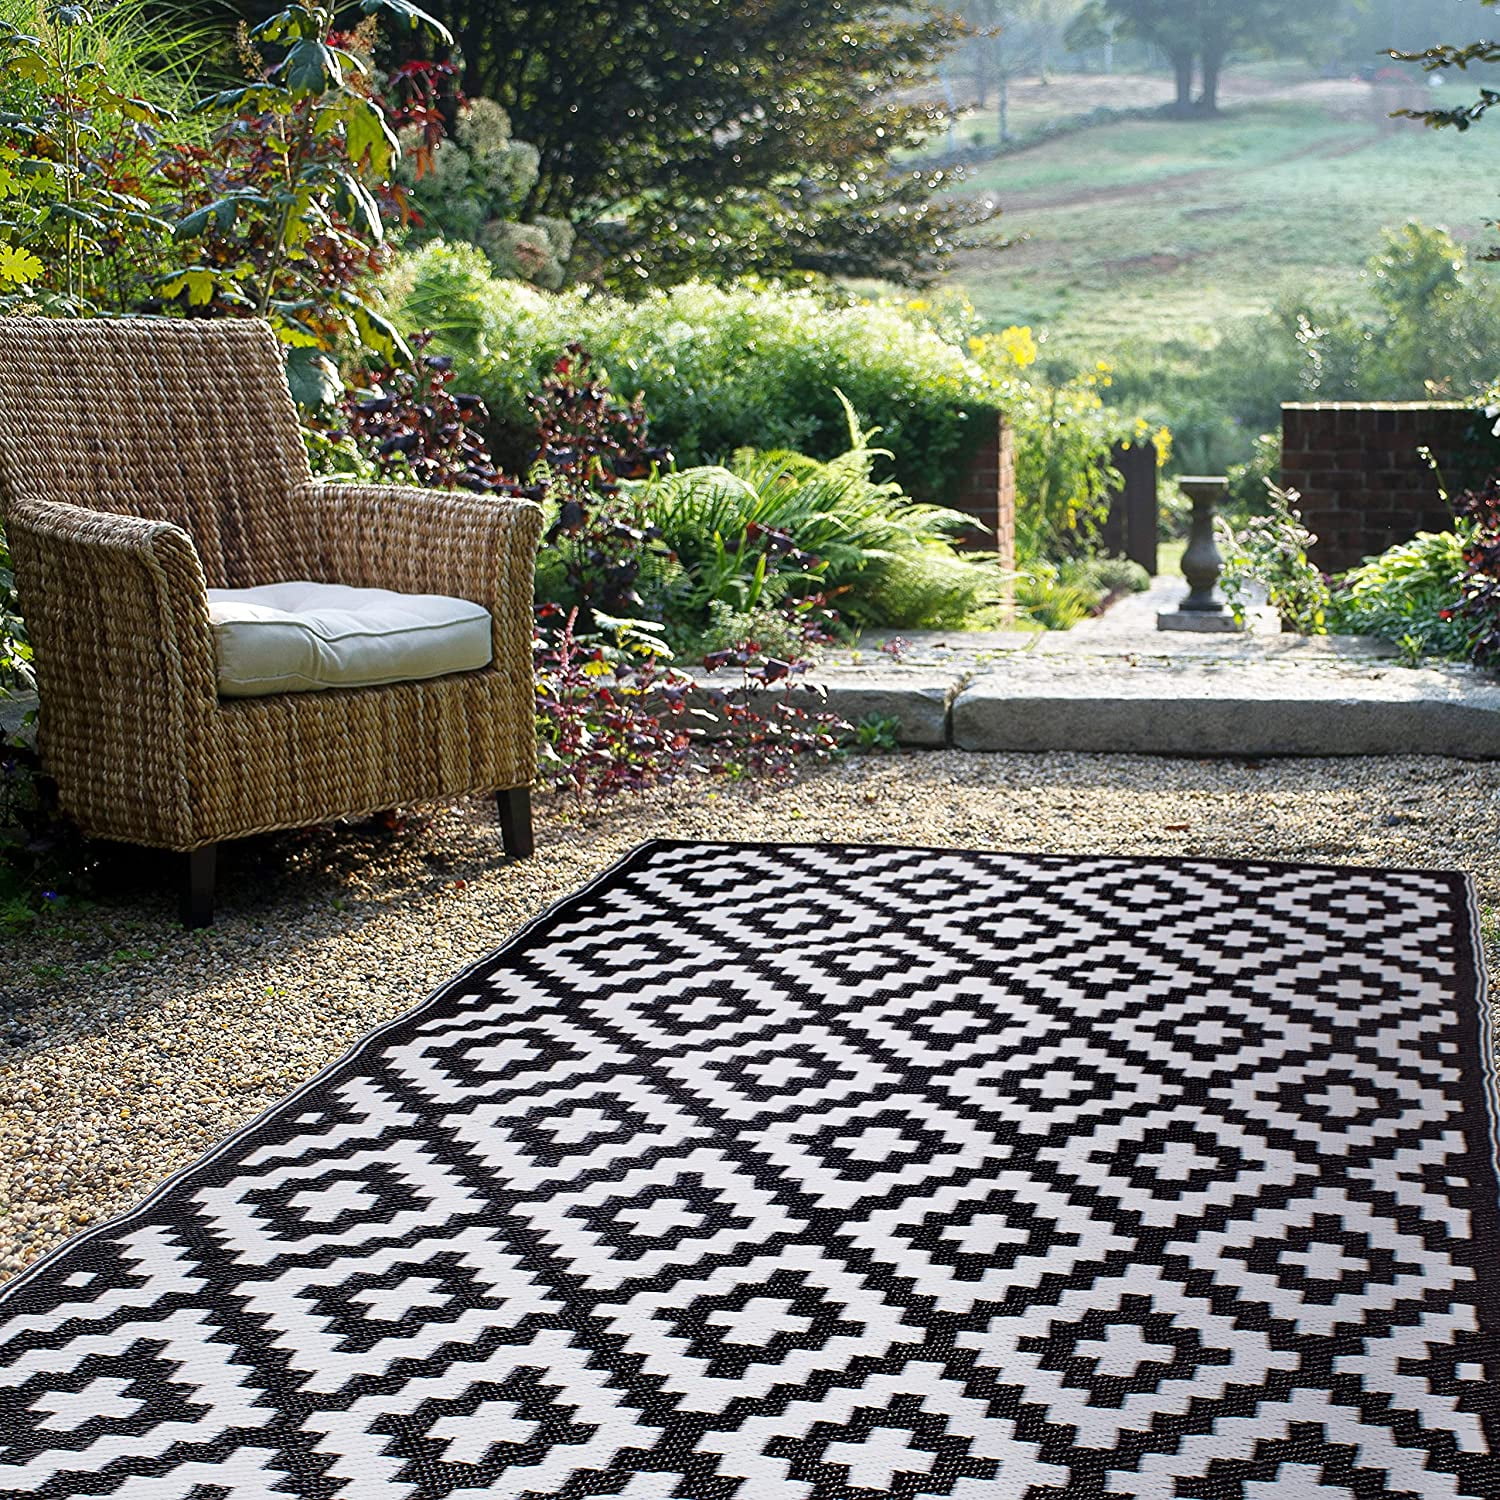 Fh Home Outdoor Rug Waterproof Fade Resistant Crease Free Premium Recycled Plastic Geometric Large Patio Deck Sunroom Camping Rv Aztec Black White 6 X 9 Ft Com